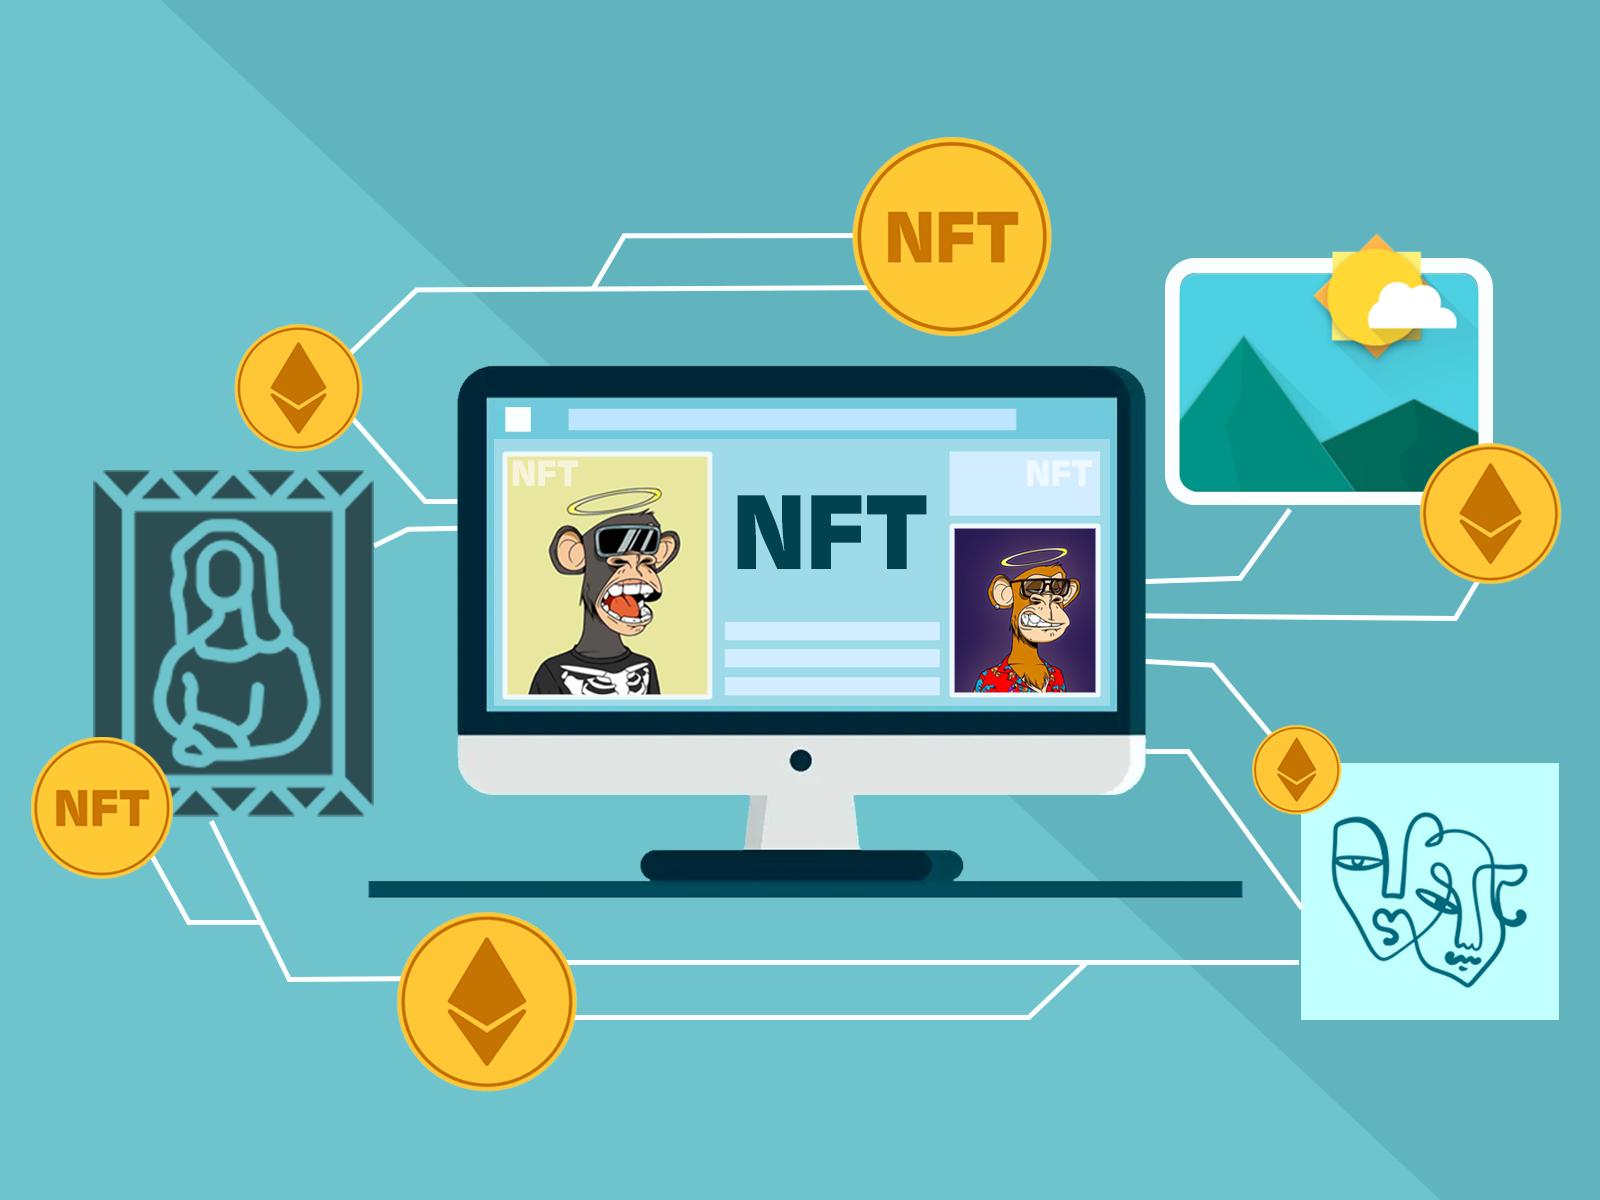 OpenSea NFT Marketplace: What It Is And How To Use It